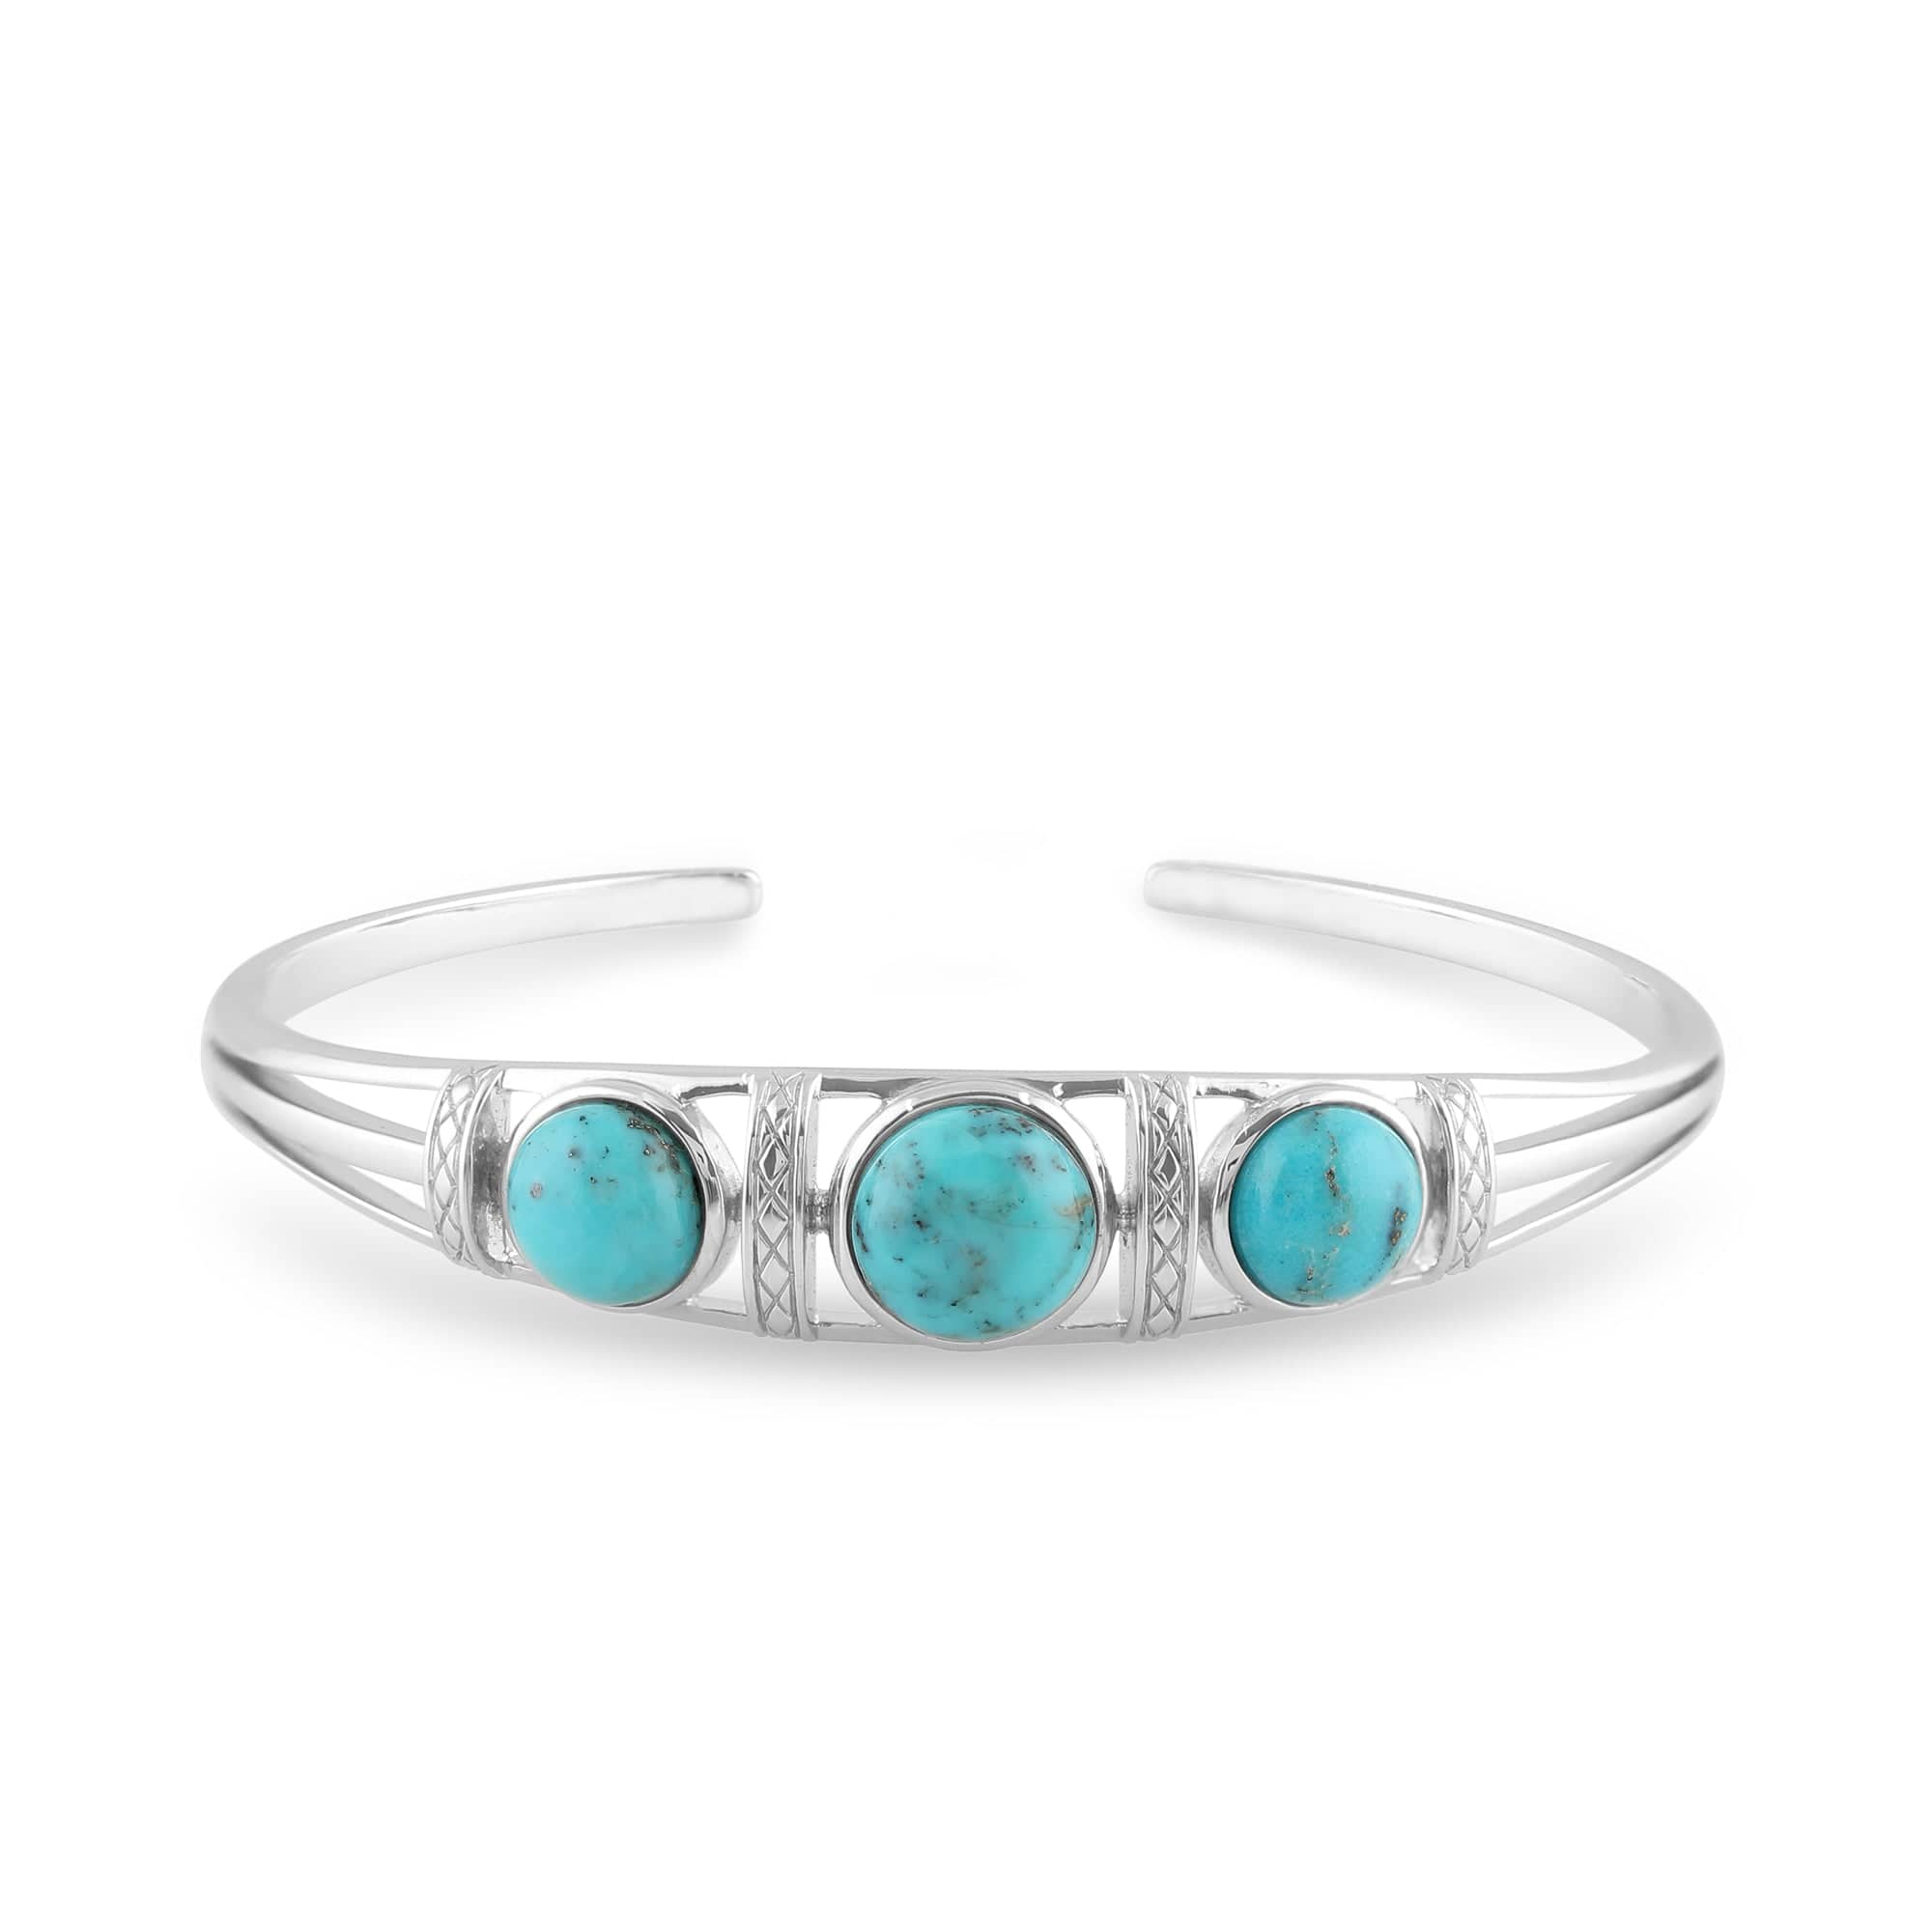 Image of Boho Round Turquoise Cabochon Bangle in 925 Sterling Silver